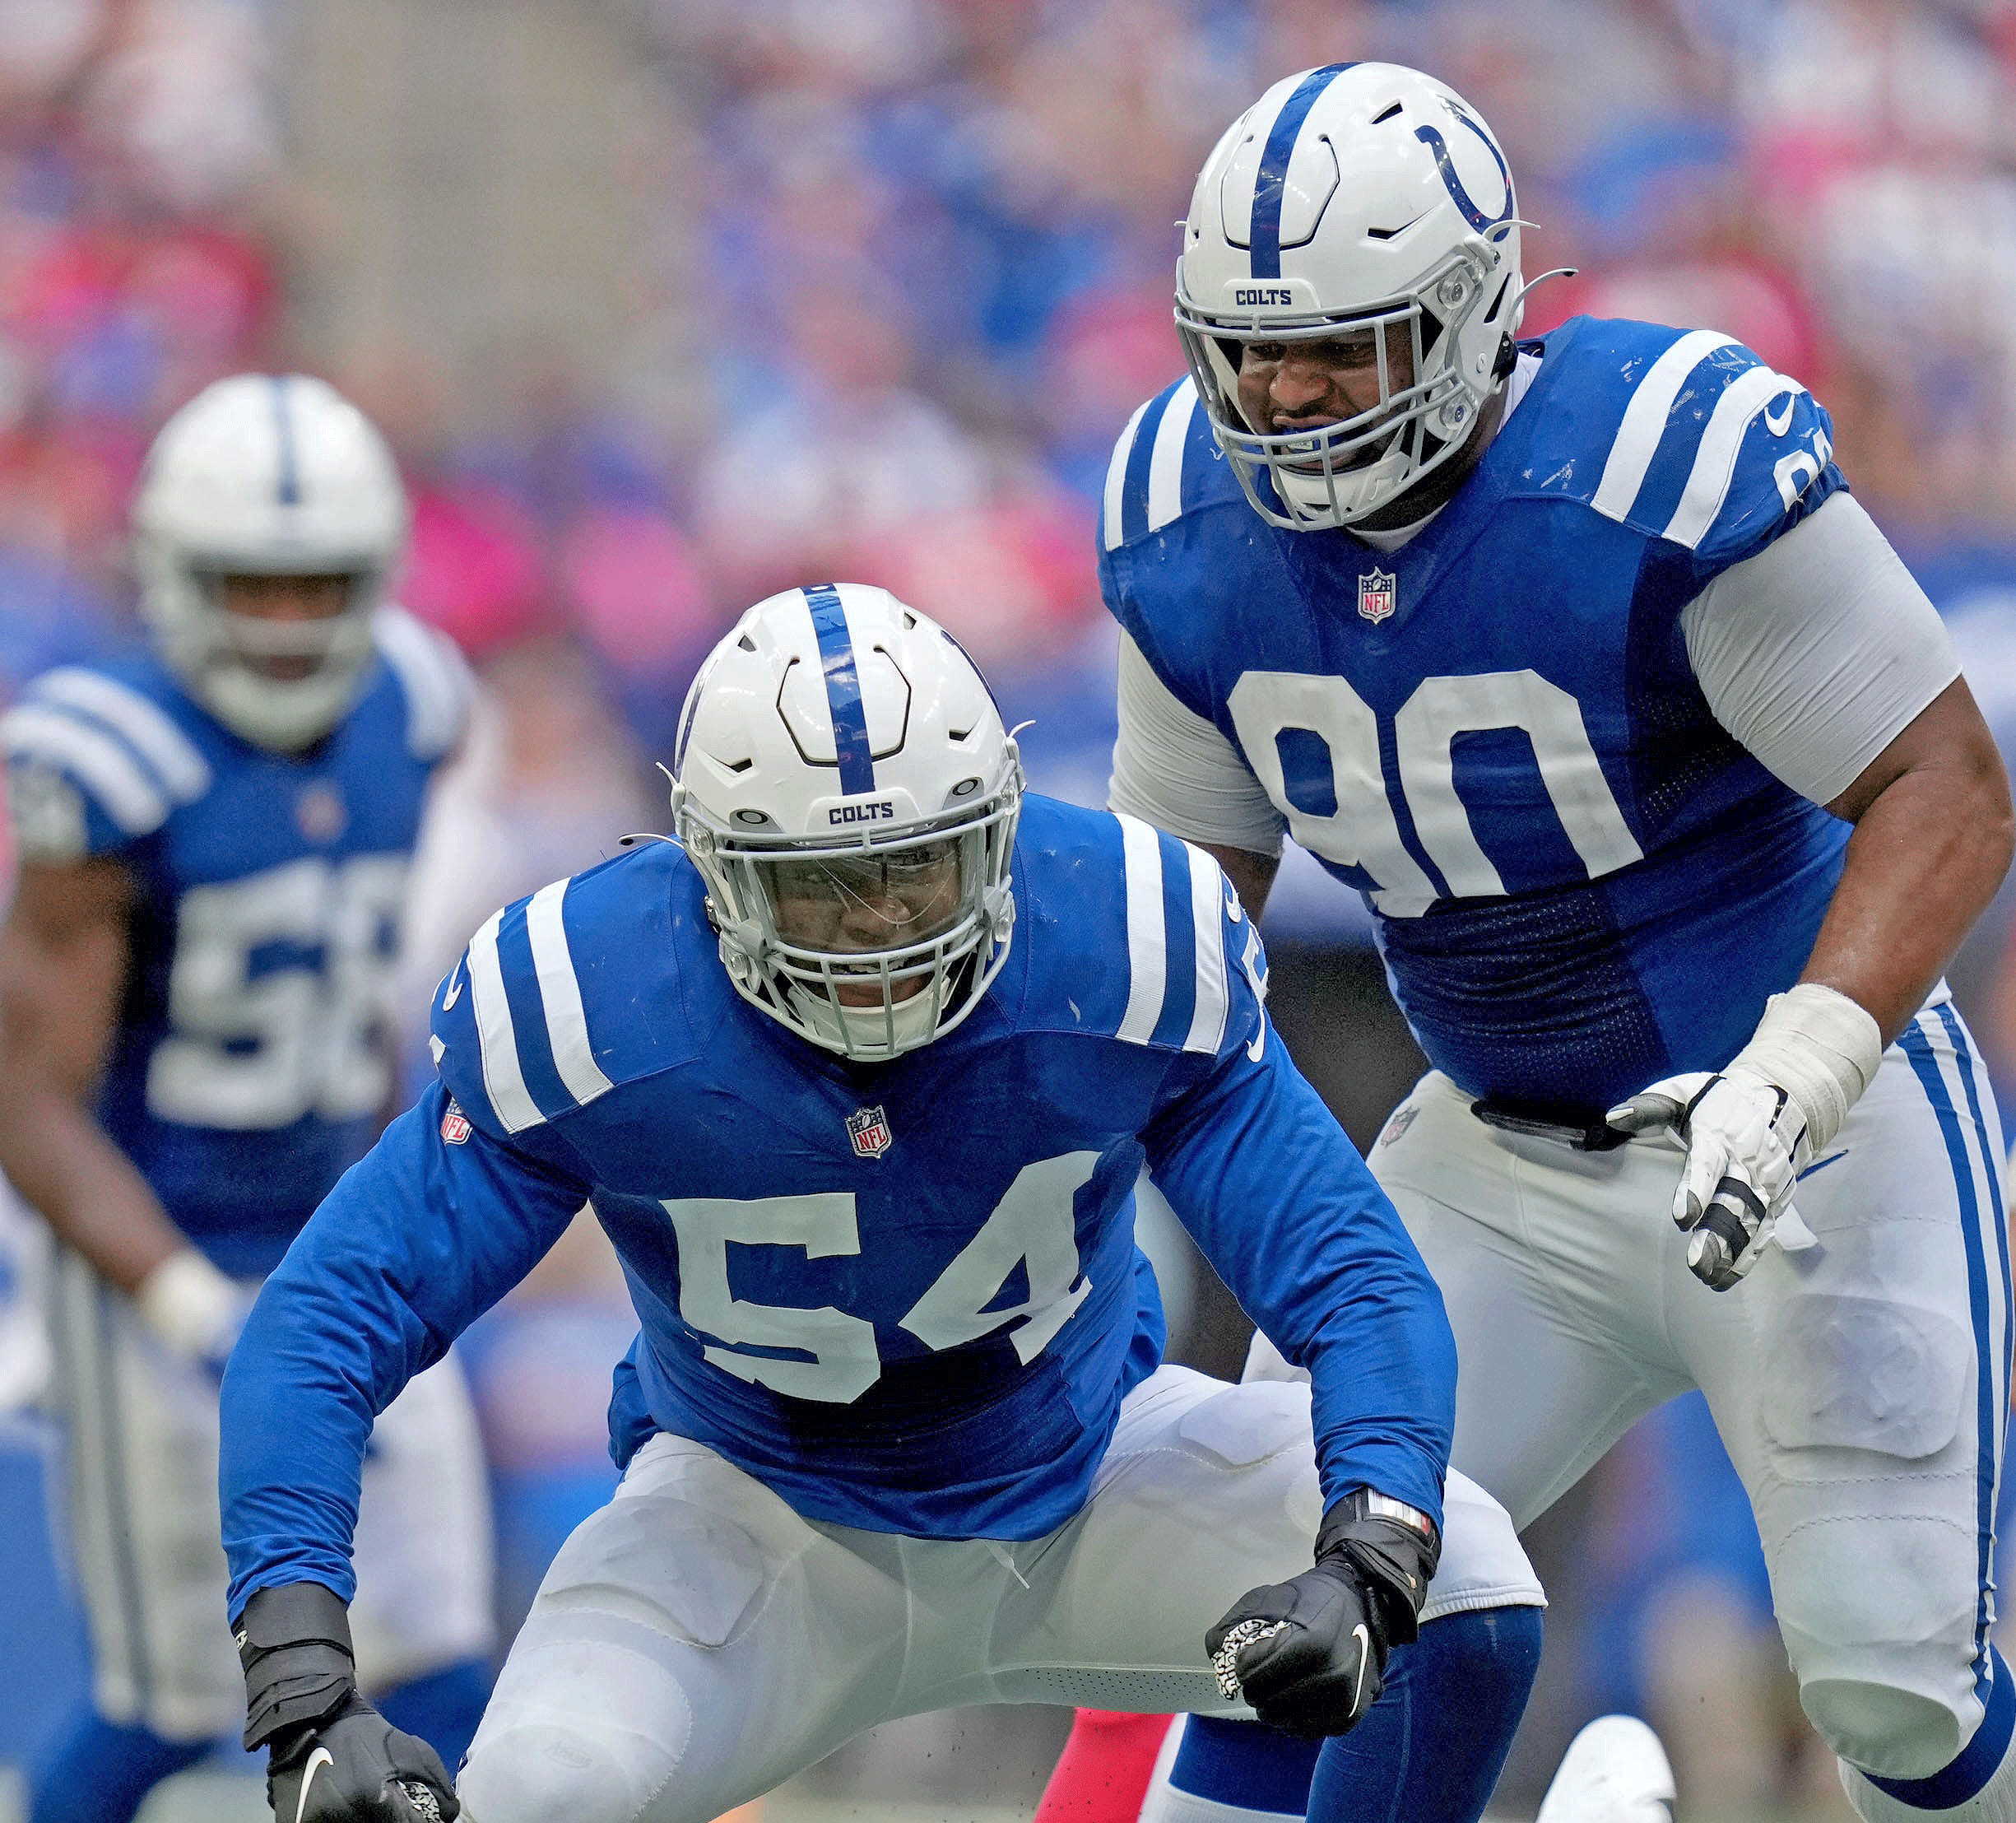 Titans vs Colts Week 4 Picks and Predictions: Defense Will Win Out For Indy